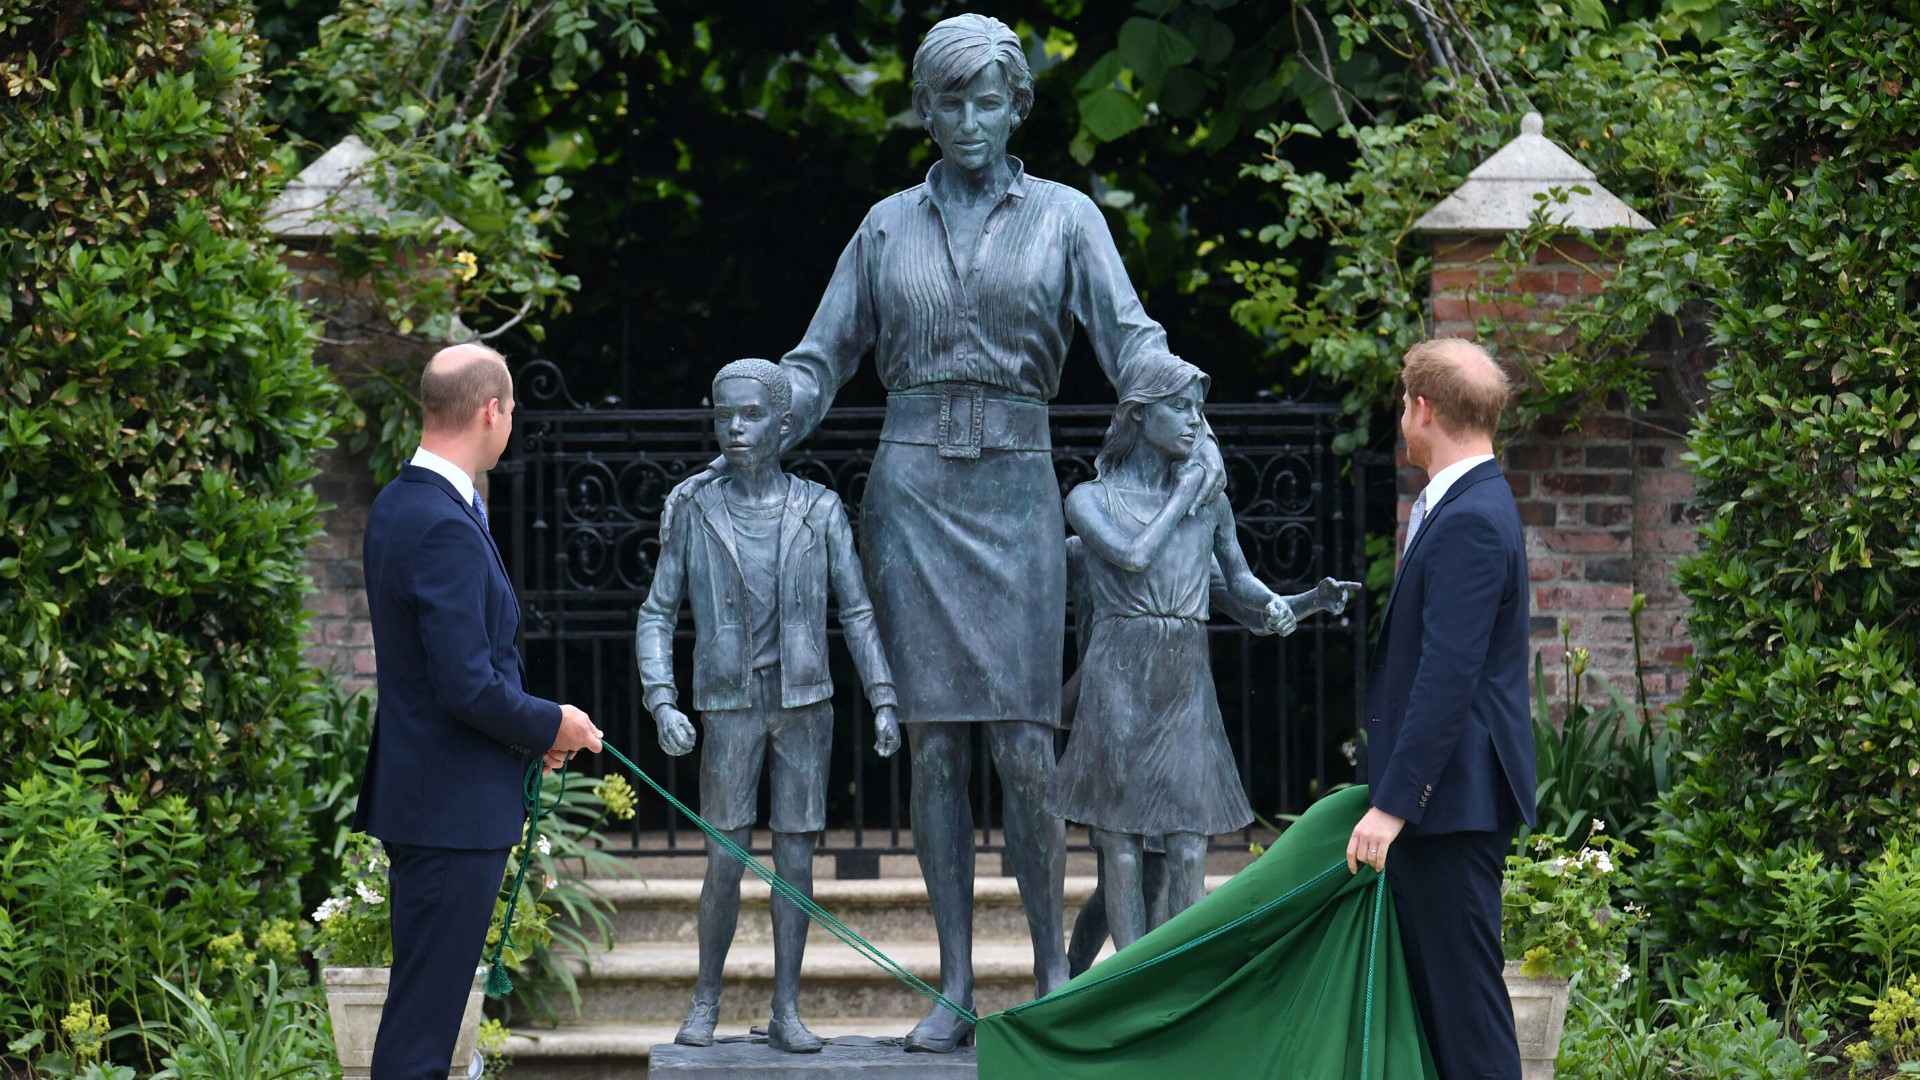 The brothers unveiled the statue of their mother, Princess Diana, on what would have been her 60th birthday